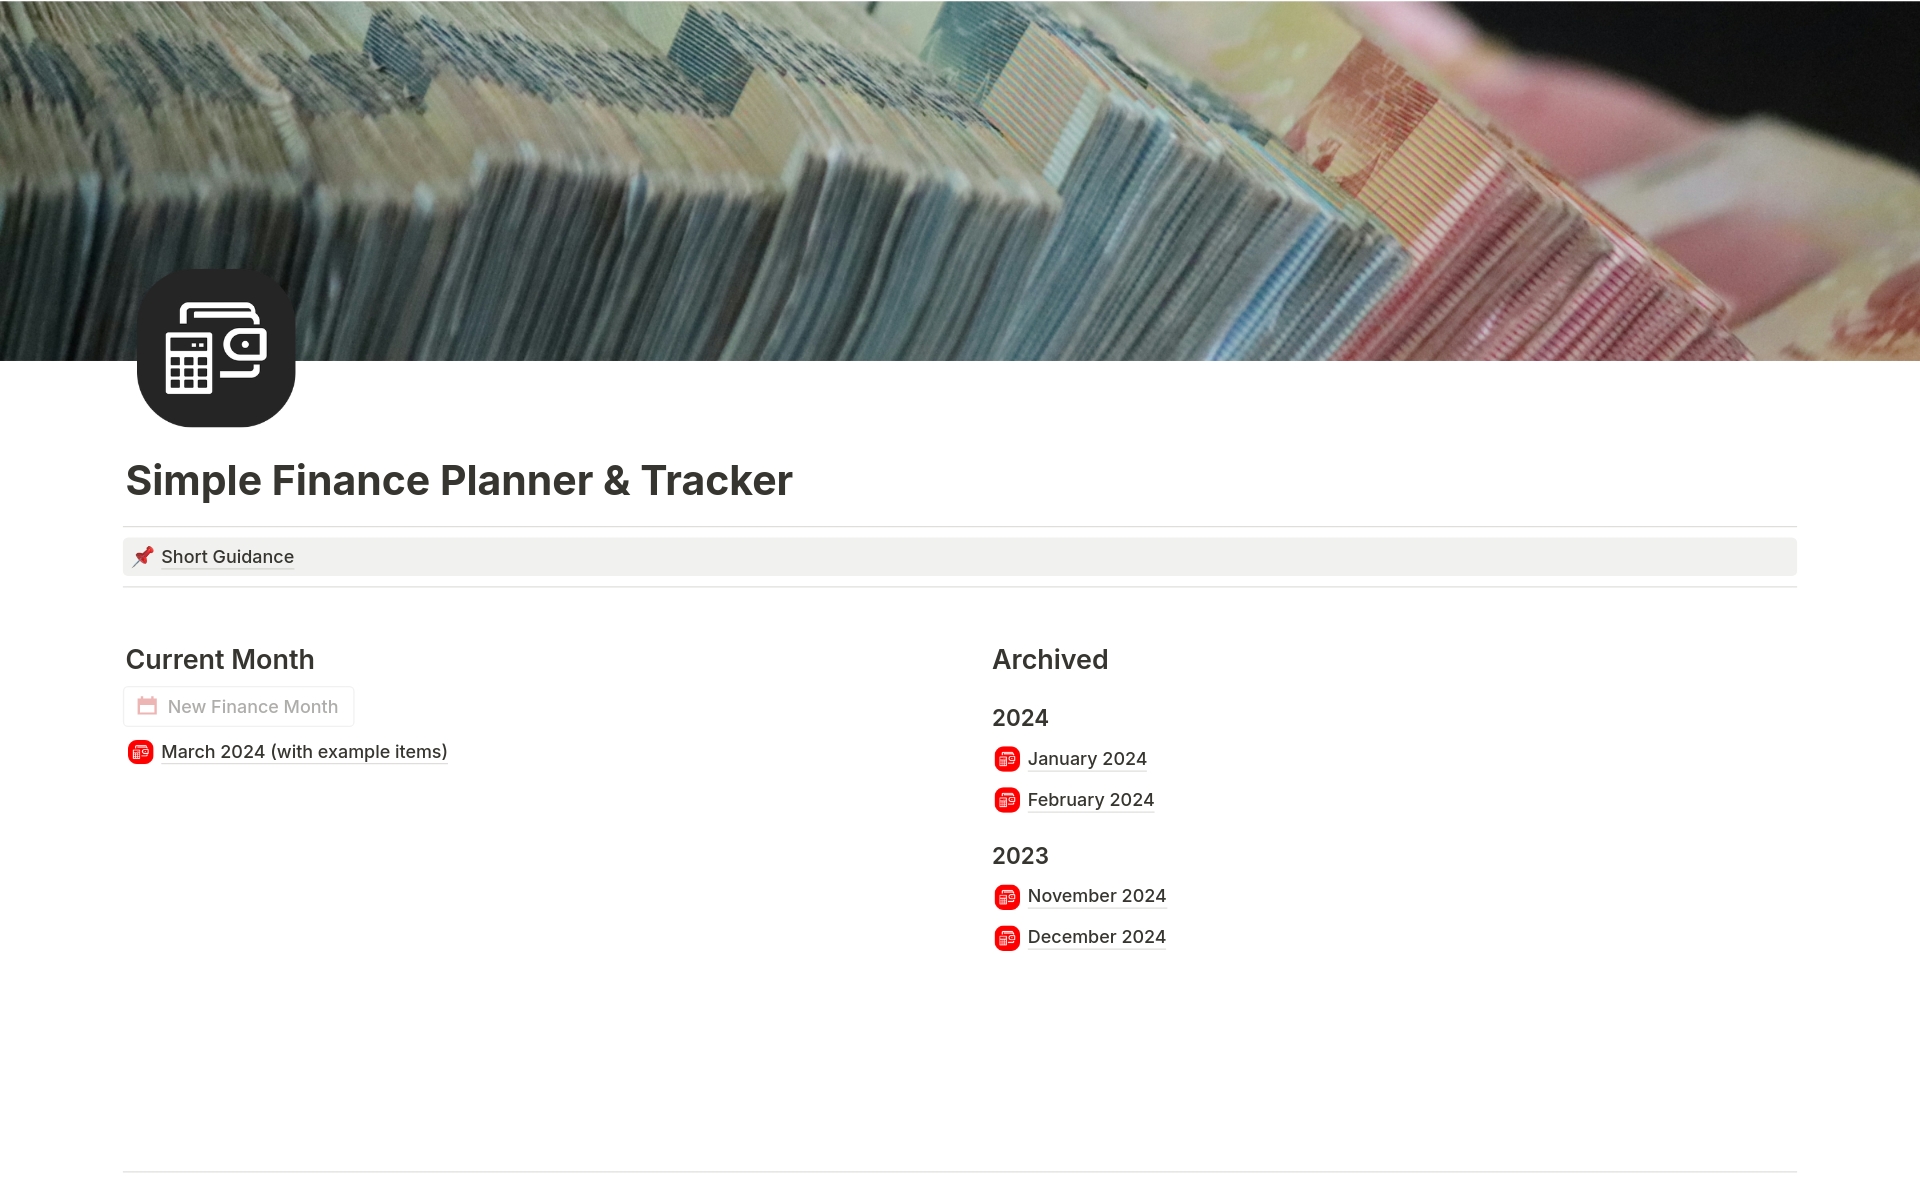 Simple Finance Planner & Tracker is a personal finance system designed to plan & track expenses every month and show progress stats throughout your tracking process.